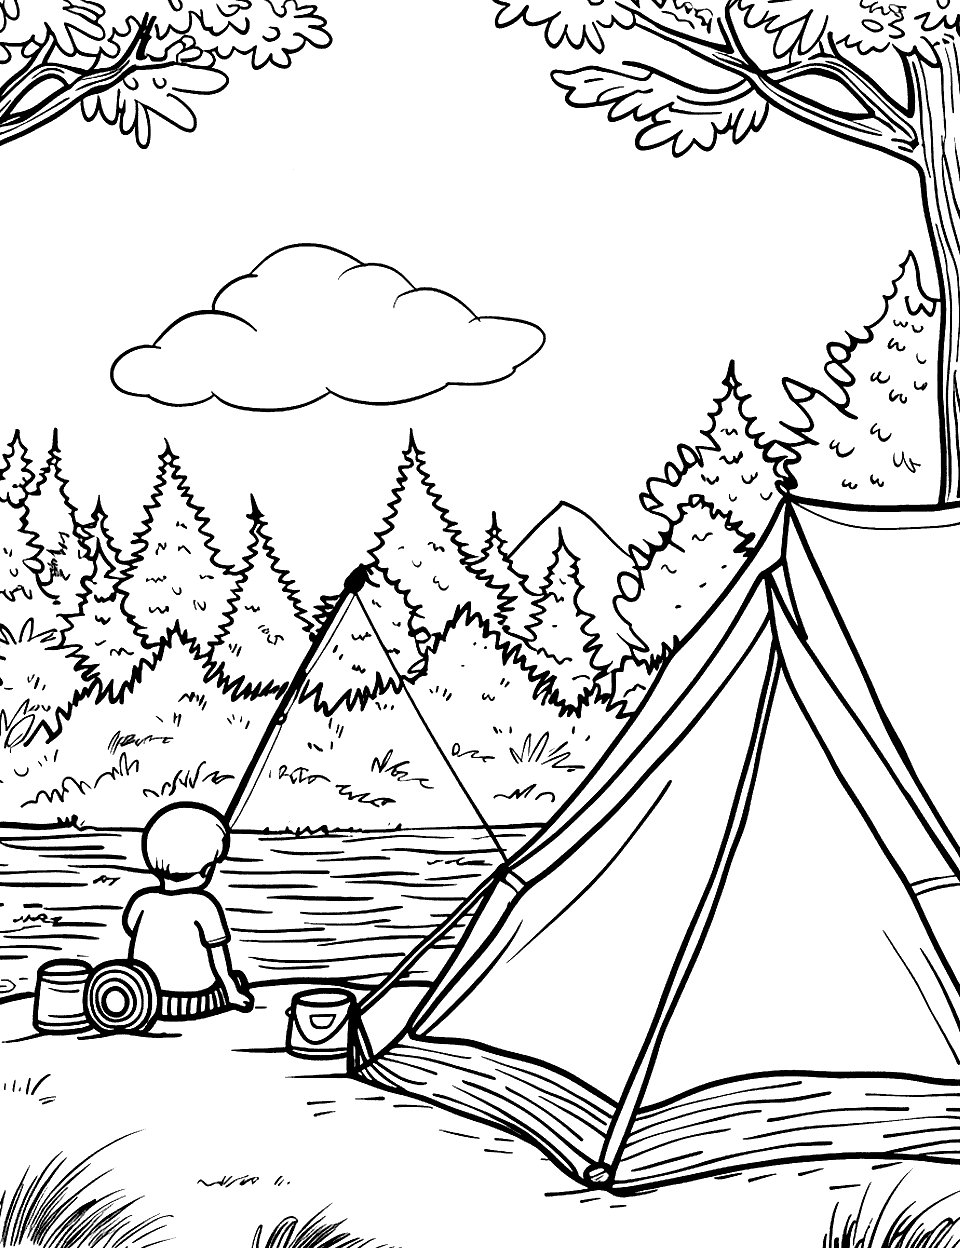 Fishing by the Campsite Camping Coloring Page - A child fishing in a river next to their campsite, with a tent in the background.